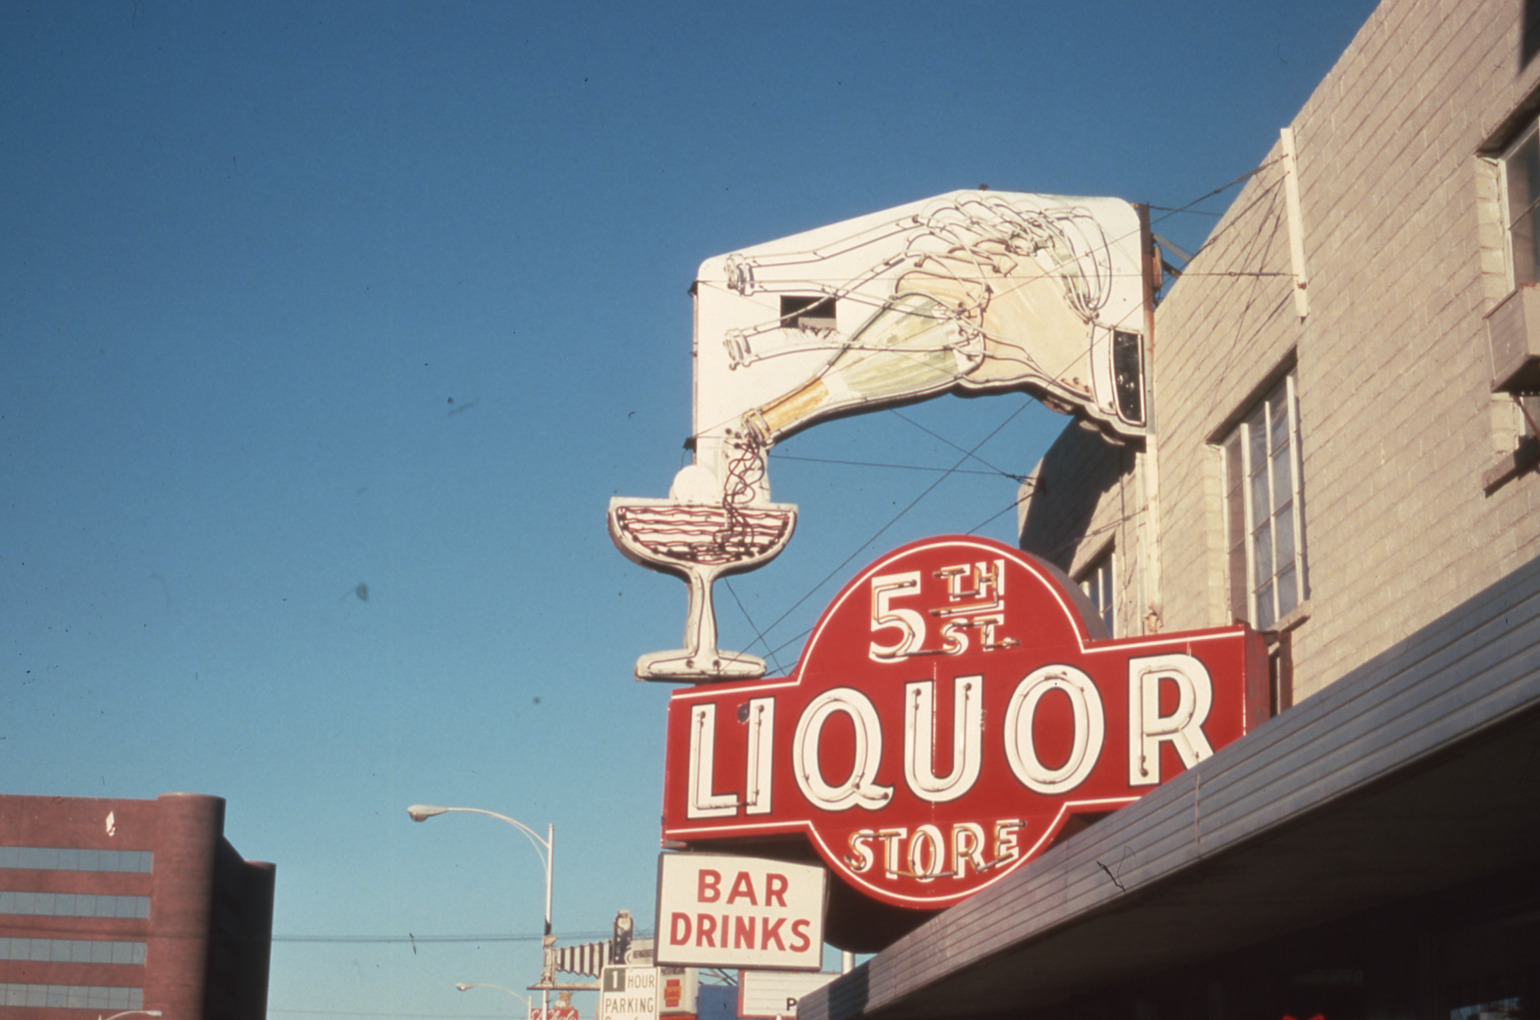 5th St Liquor Store flag mounted wall signs, Las Vegas, Nevada: photographic print